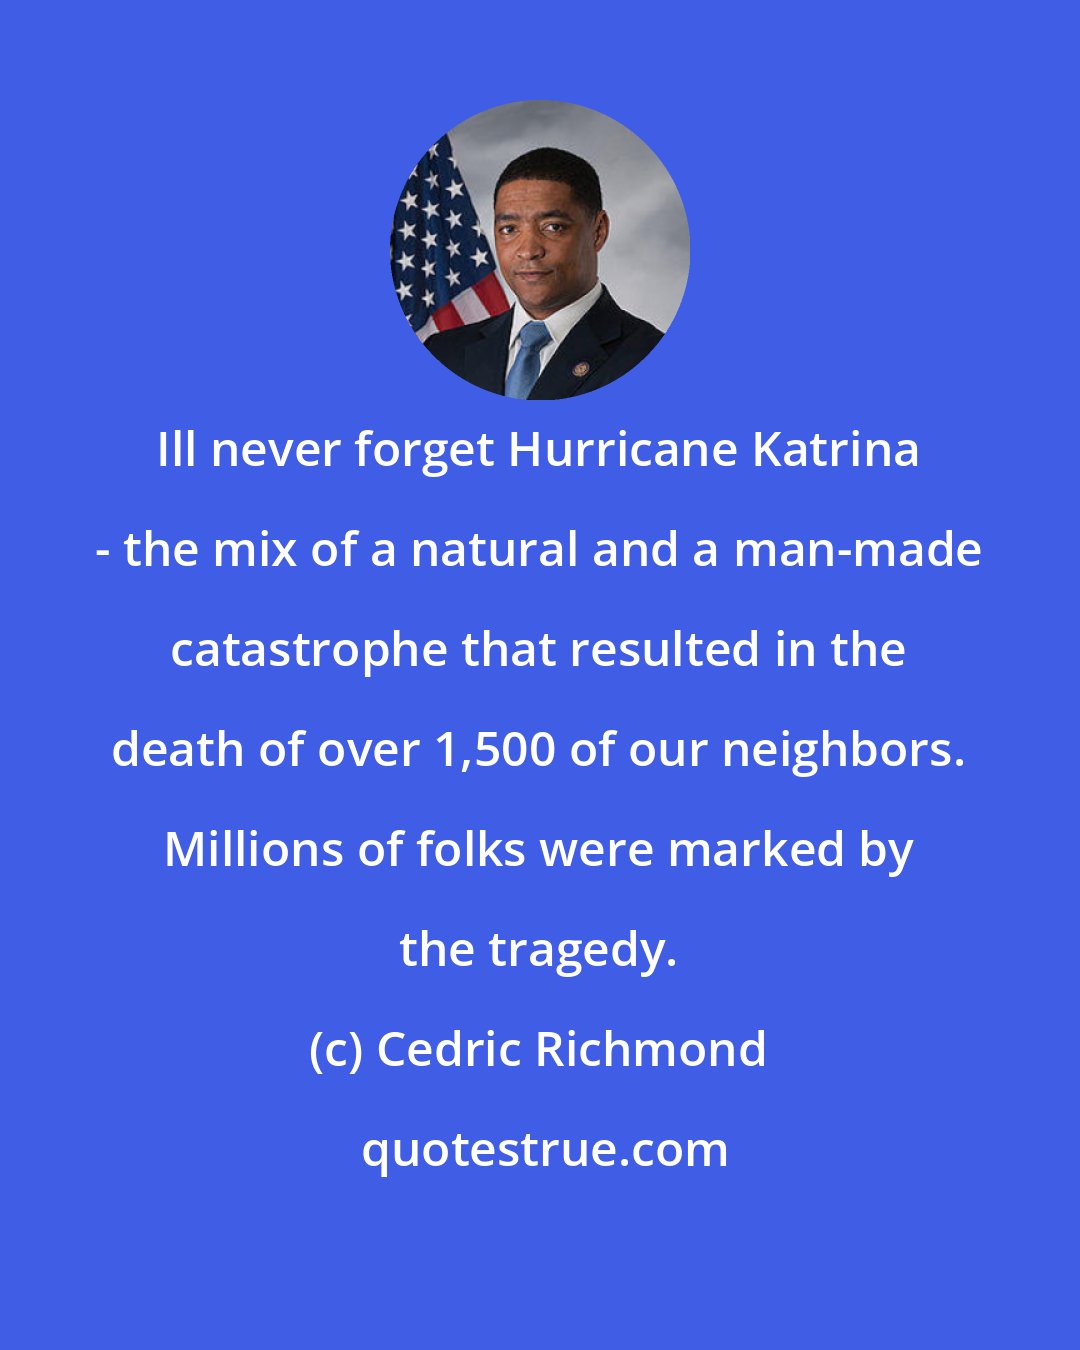 Cedric Richmond: Ill never forget Hurricane Katrina - the mix of a natural and a man-made catastrophe that resulted in the death of over 1,500 of our neighbors. Millions of folks were marked by the tragedy.